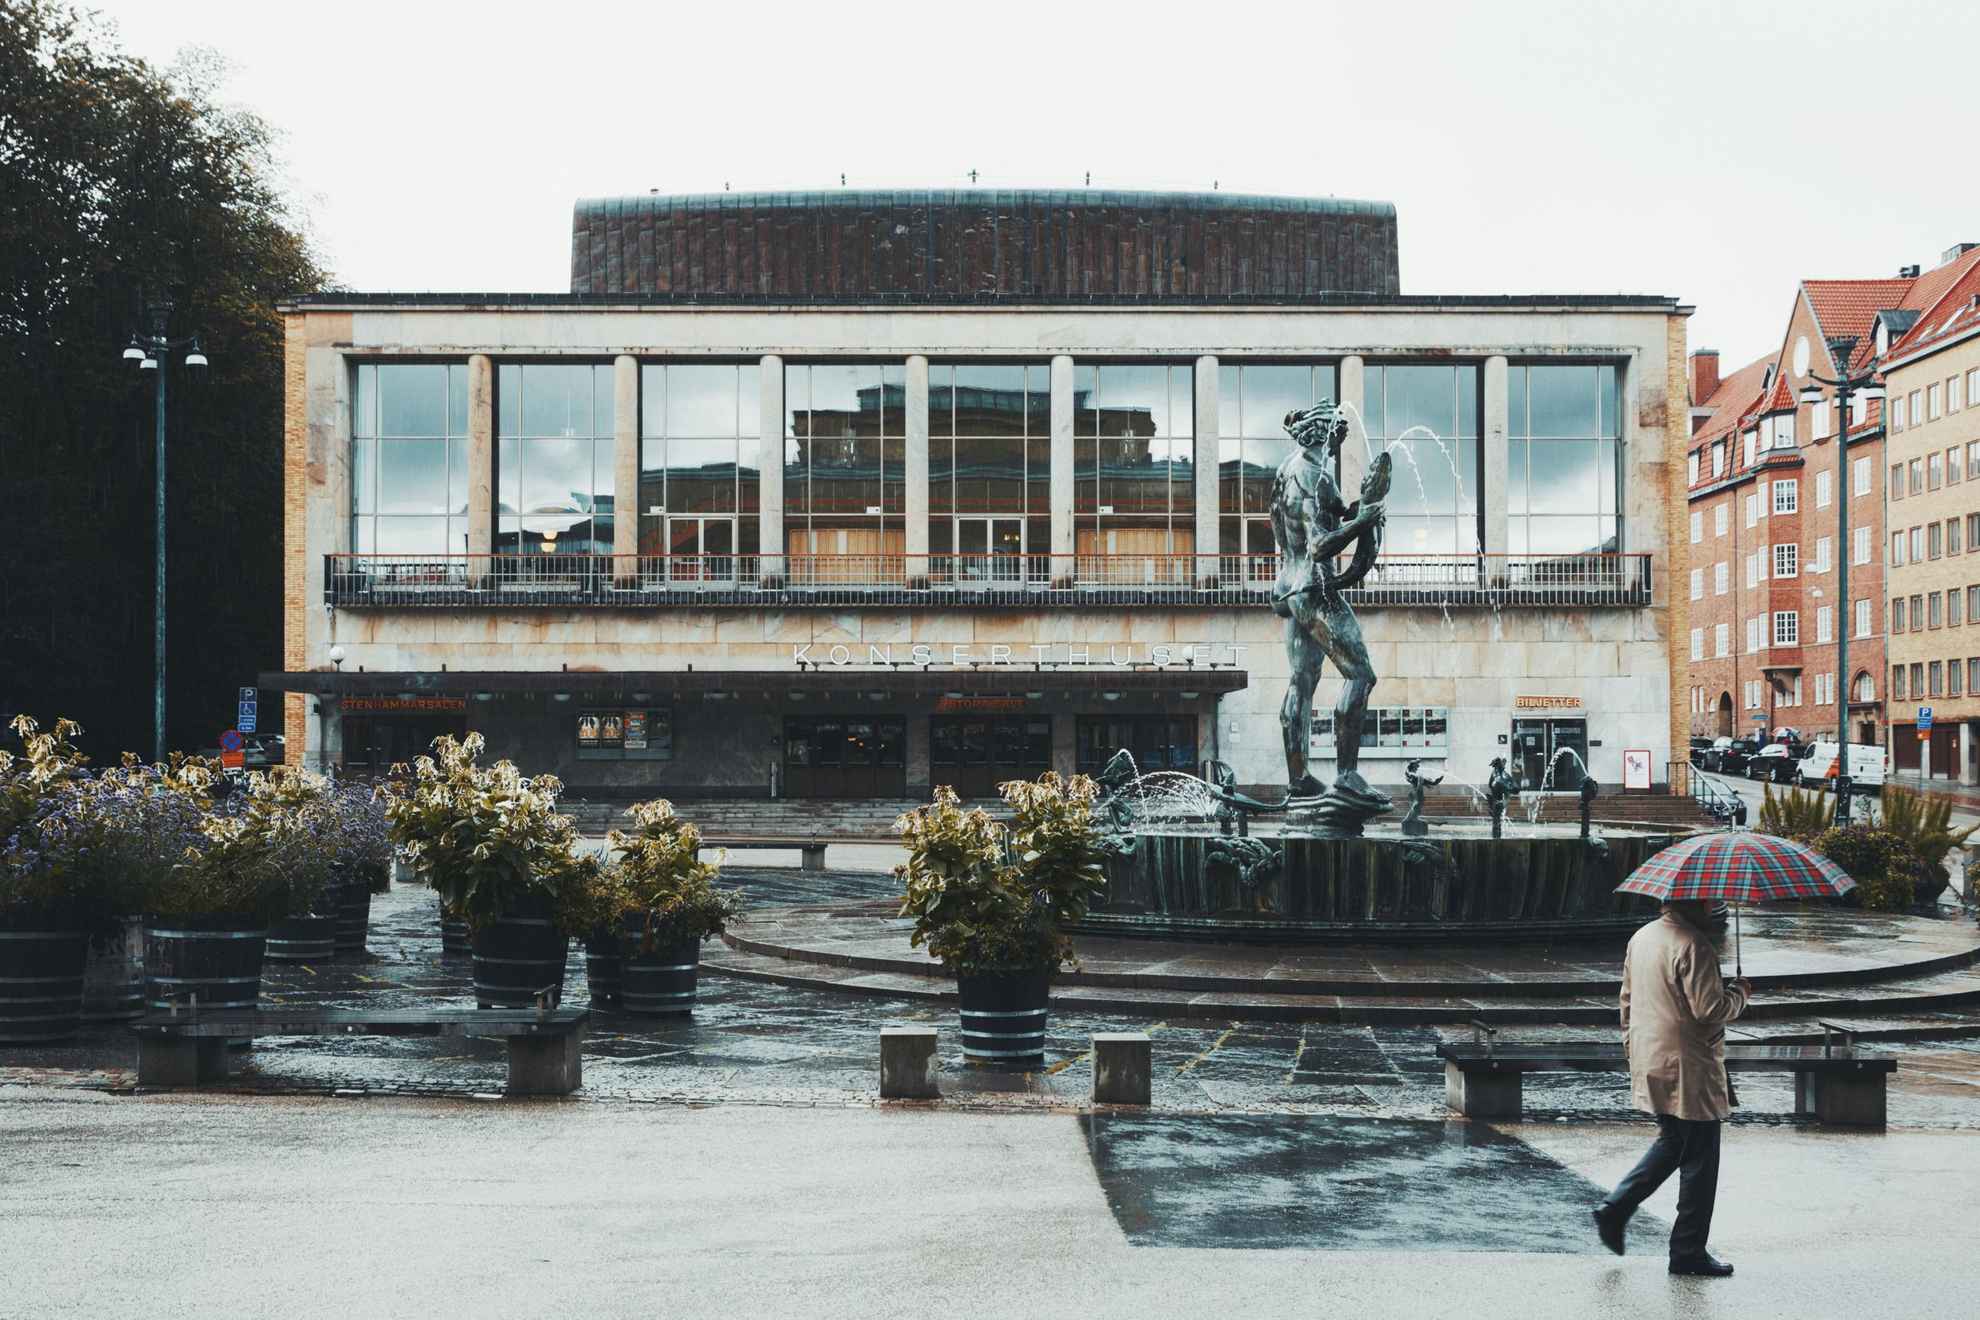 A man holding an umbrella walks past the Concert hall and Poseidon statue in Gothenburg.